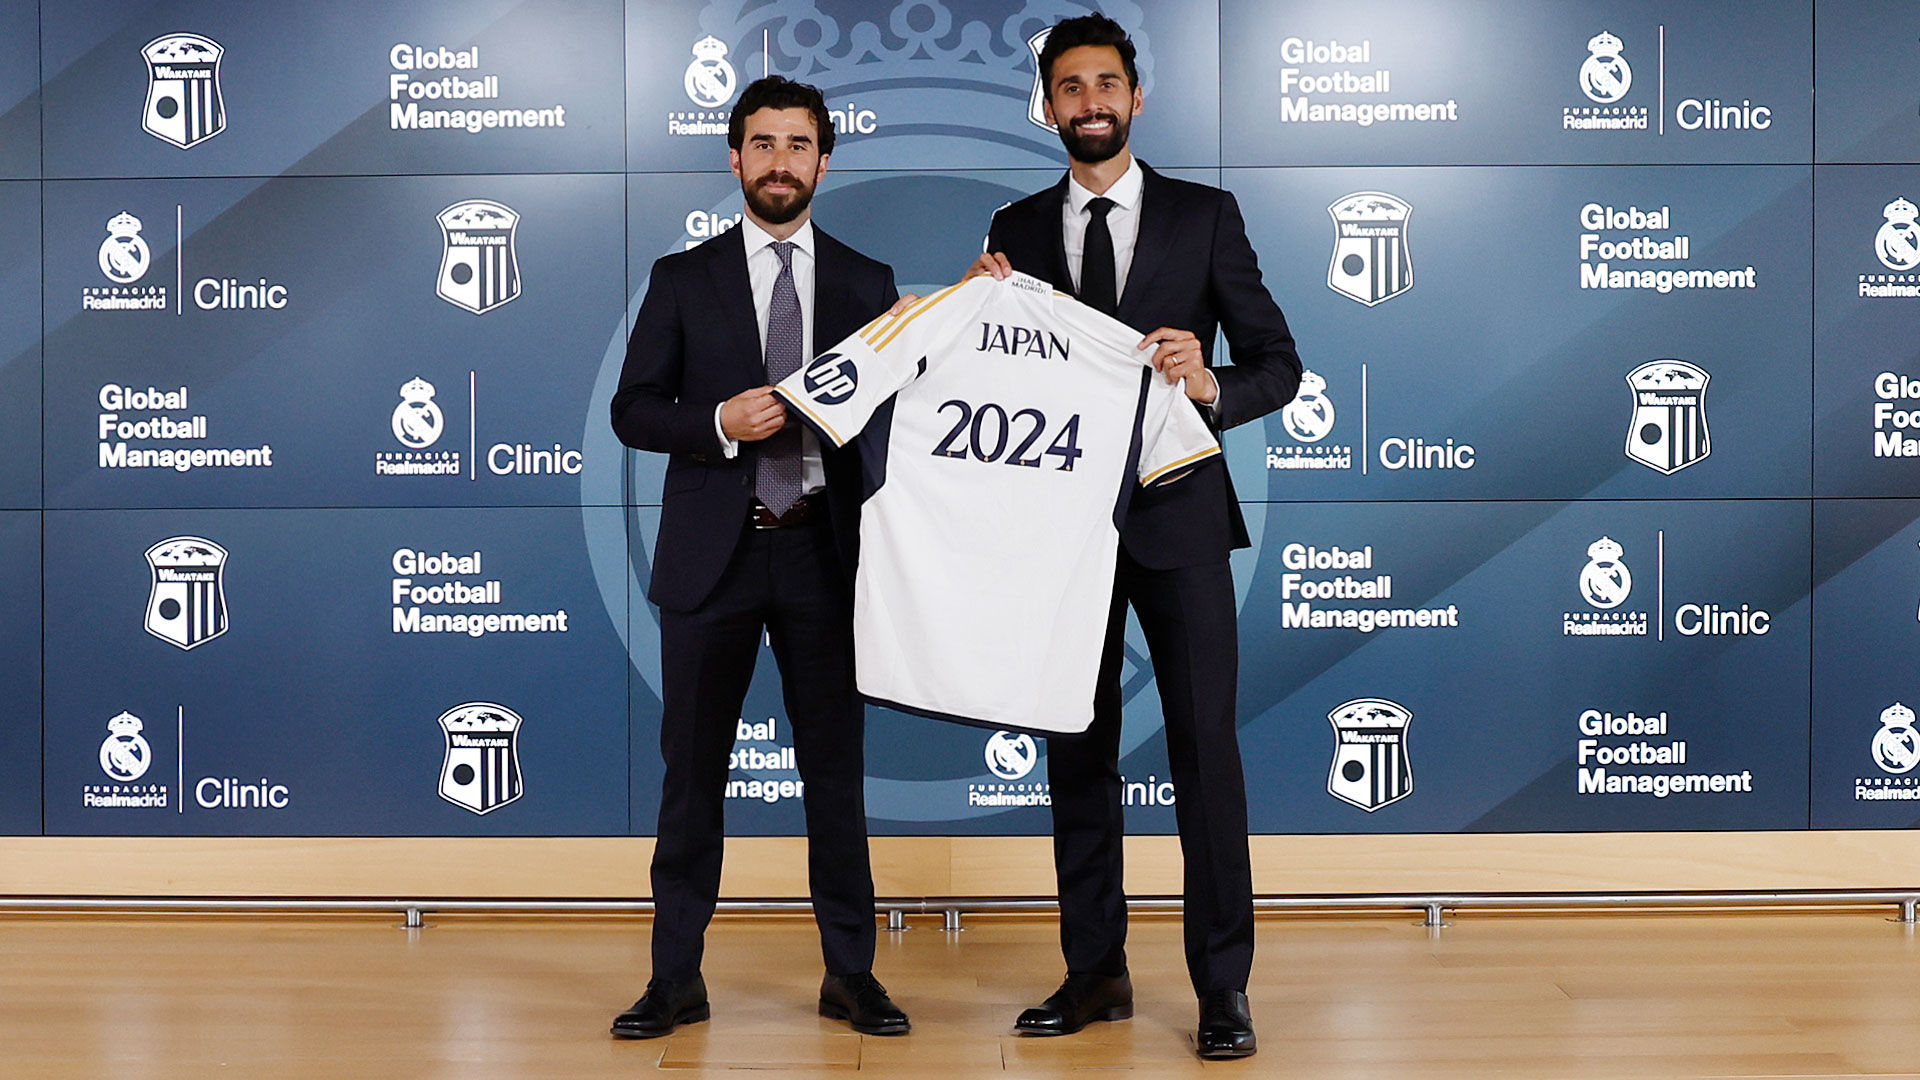 Arbeloa launches the Real Madrid Foundation clinics in Japan